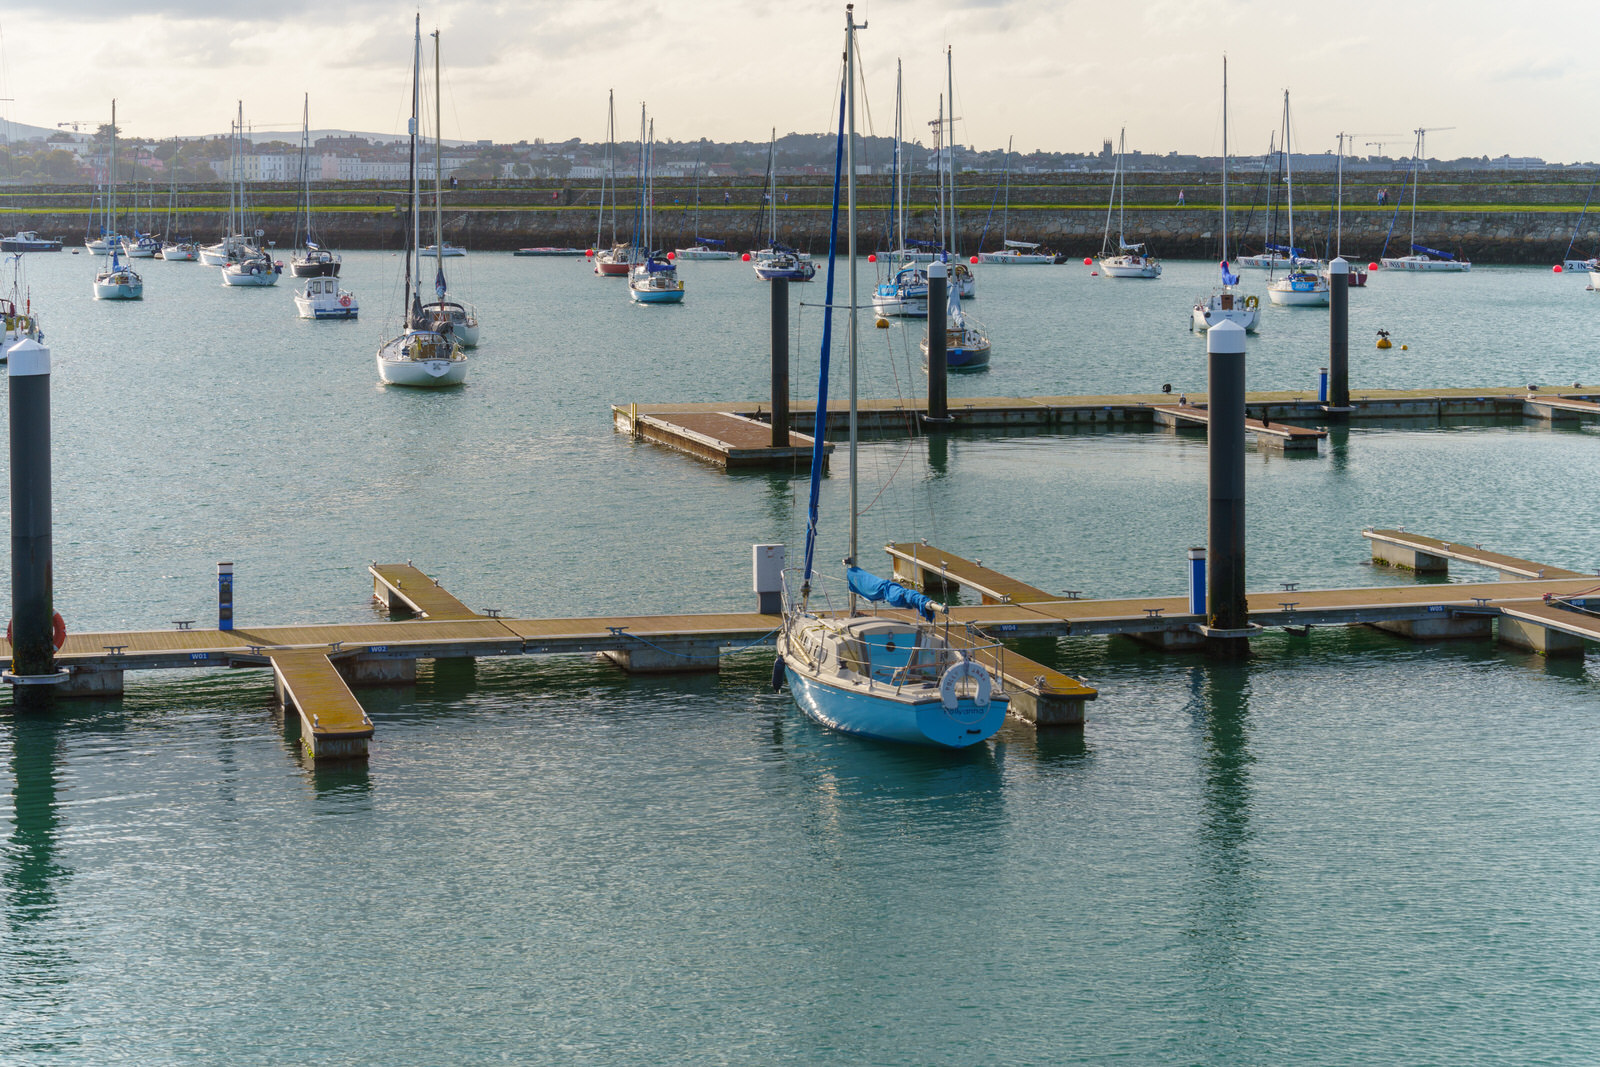 THE SECTION OF THE MARINA NEAR THE WESTERN BREAKWATER [DUN LAOGHAIRE HARBOUR]
 004